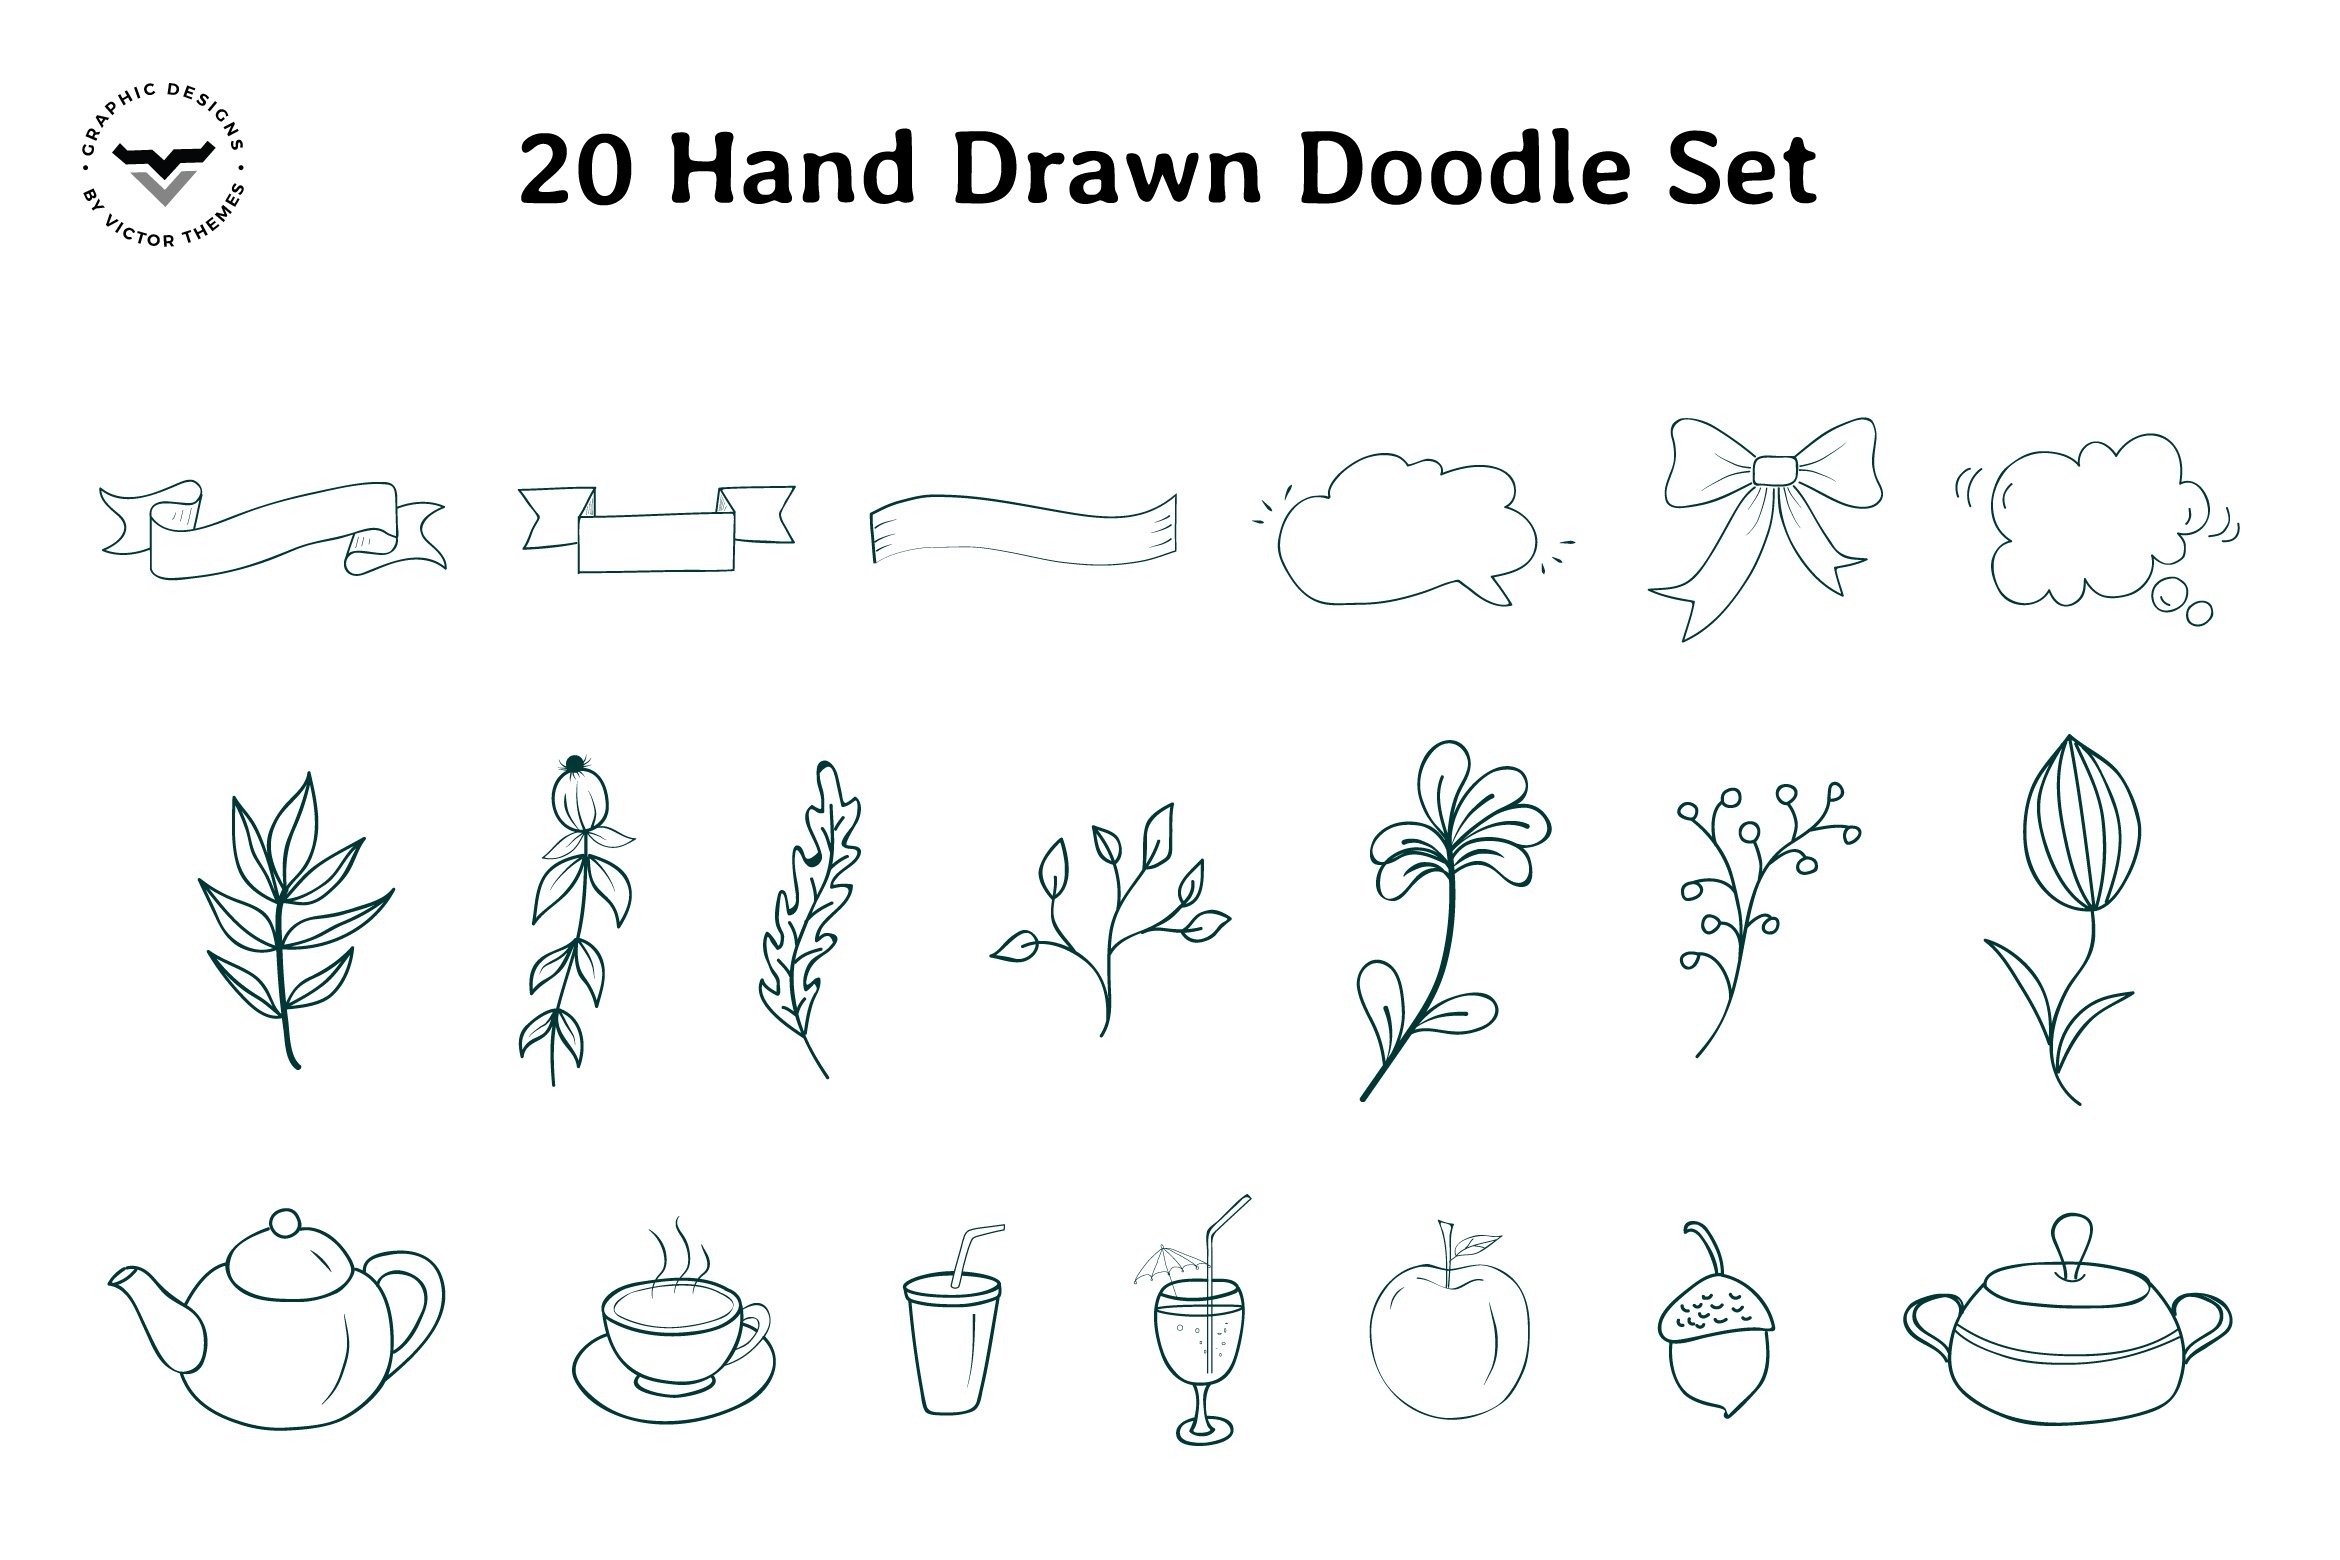 Sign In Hand Drawn Doodle Set